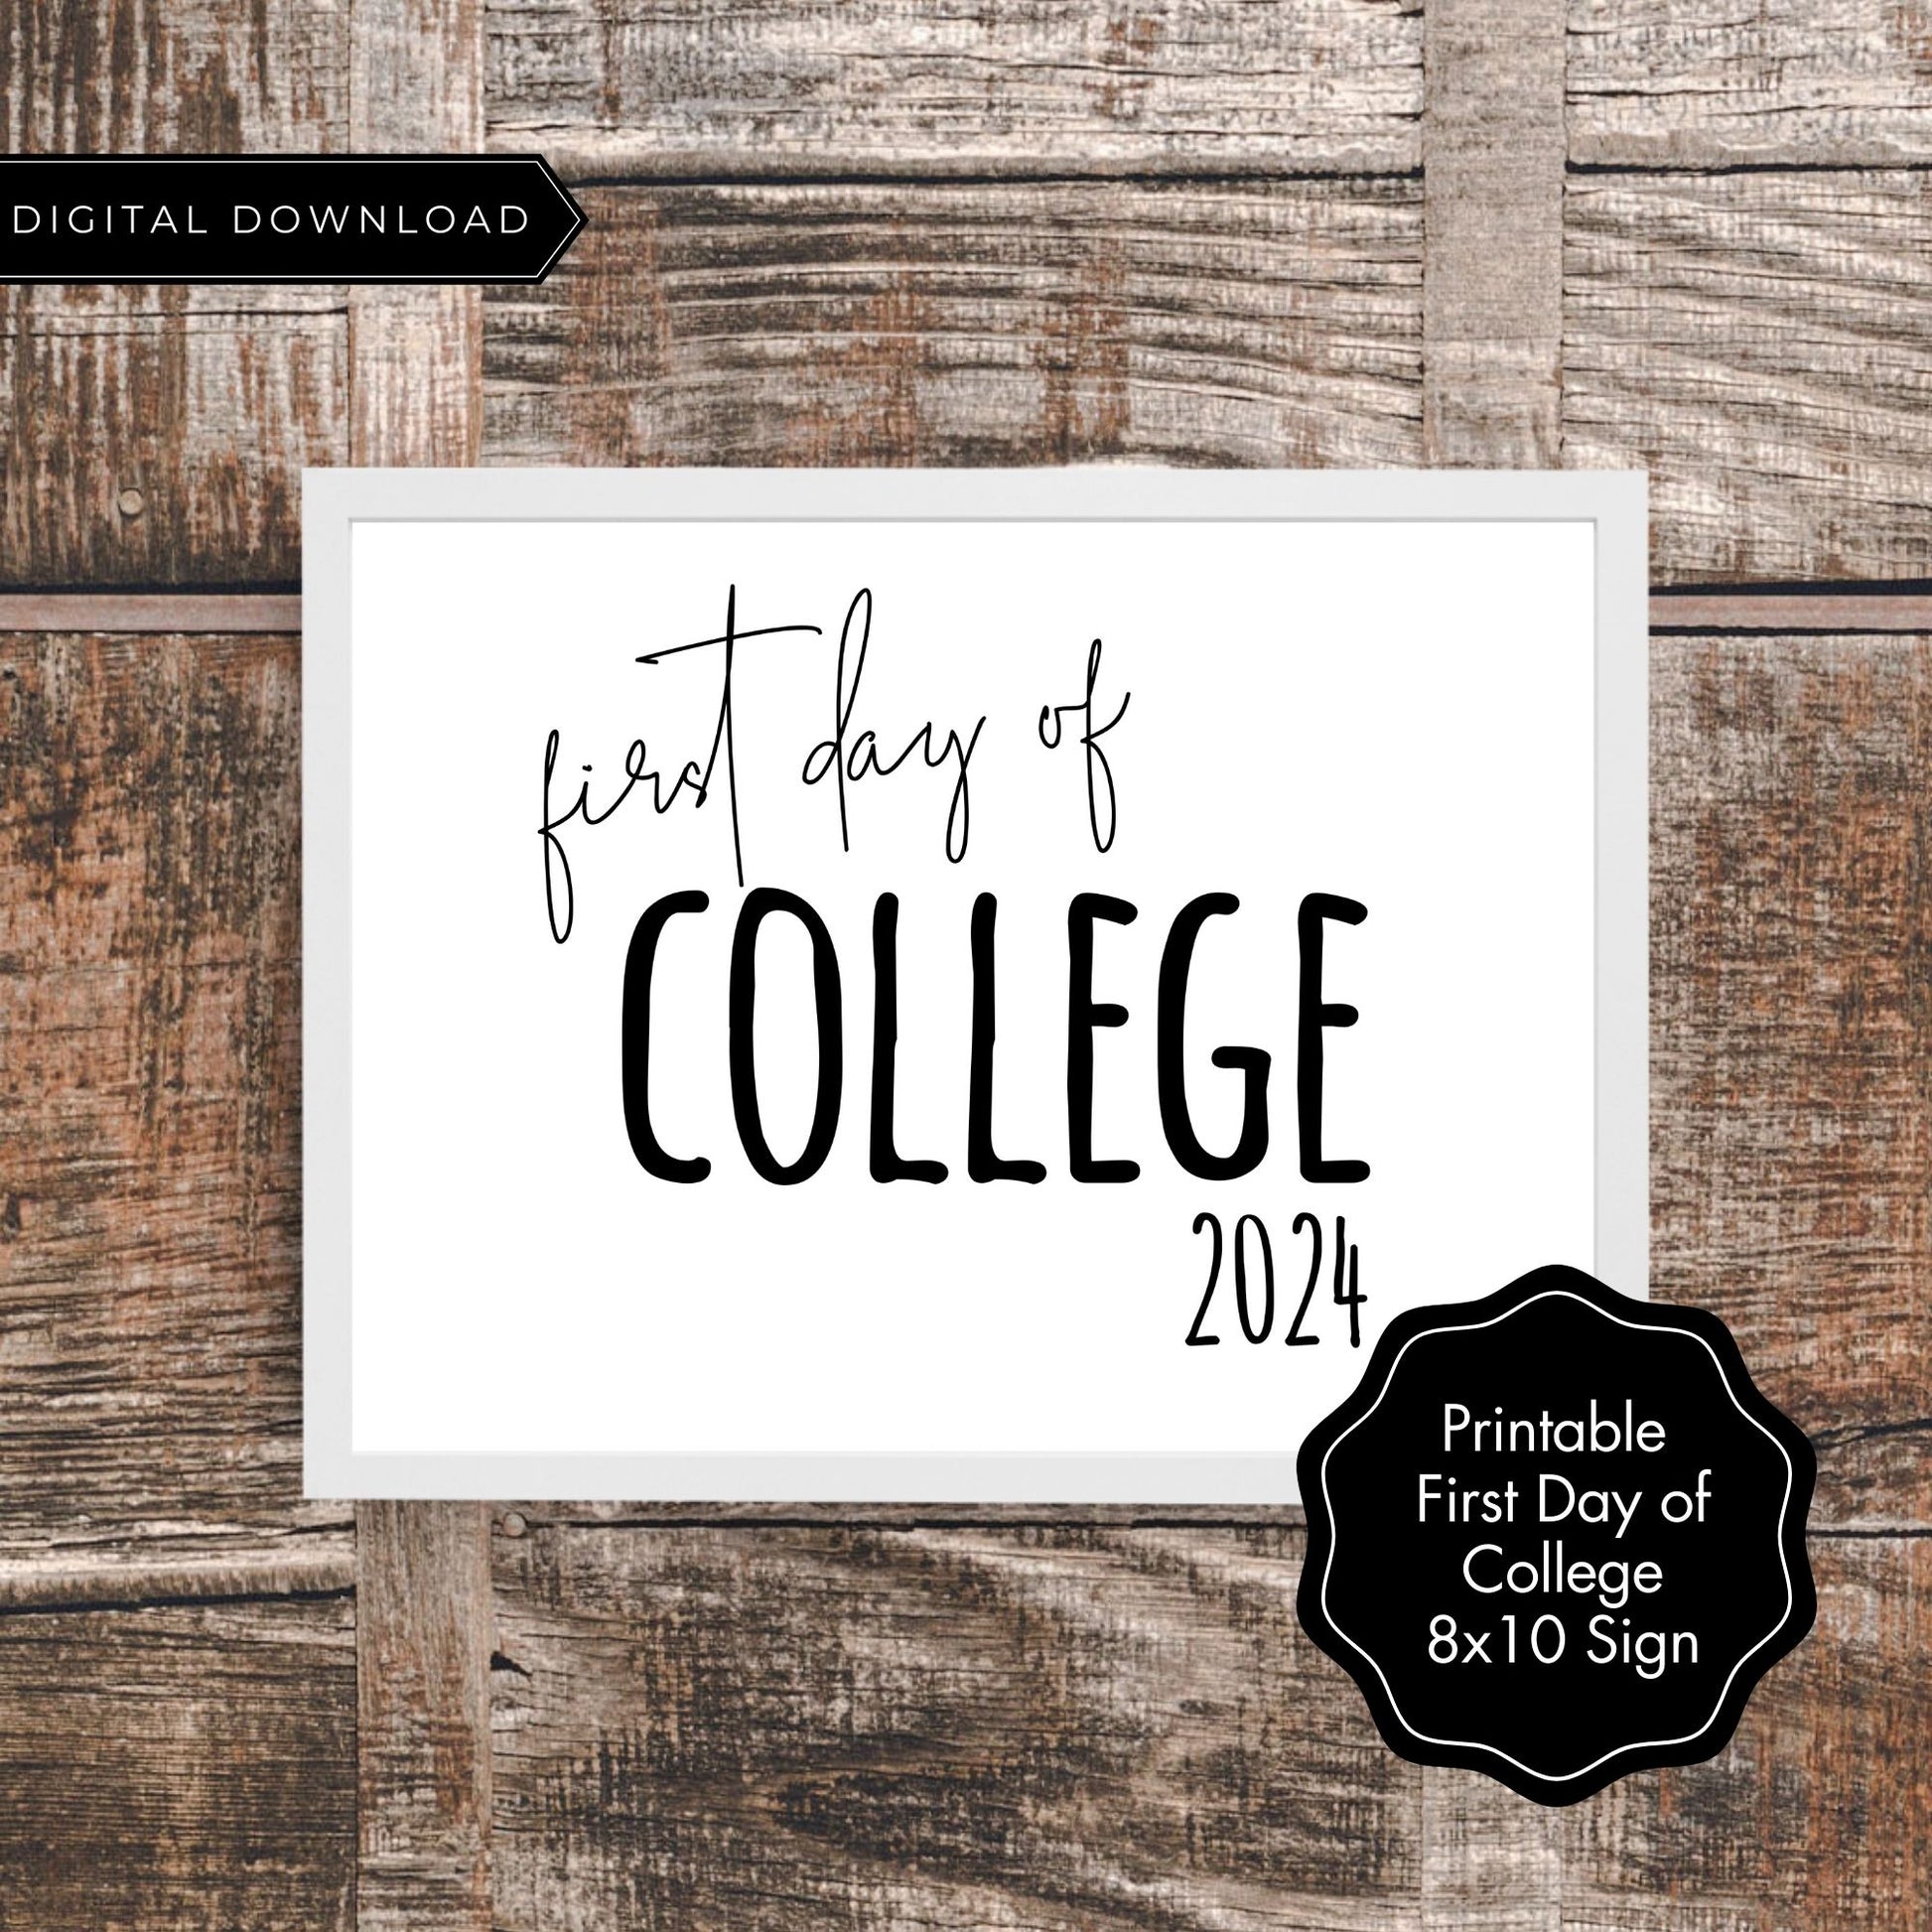 First Day of College 2024 Printable 8x10 Sign